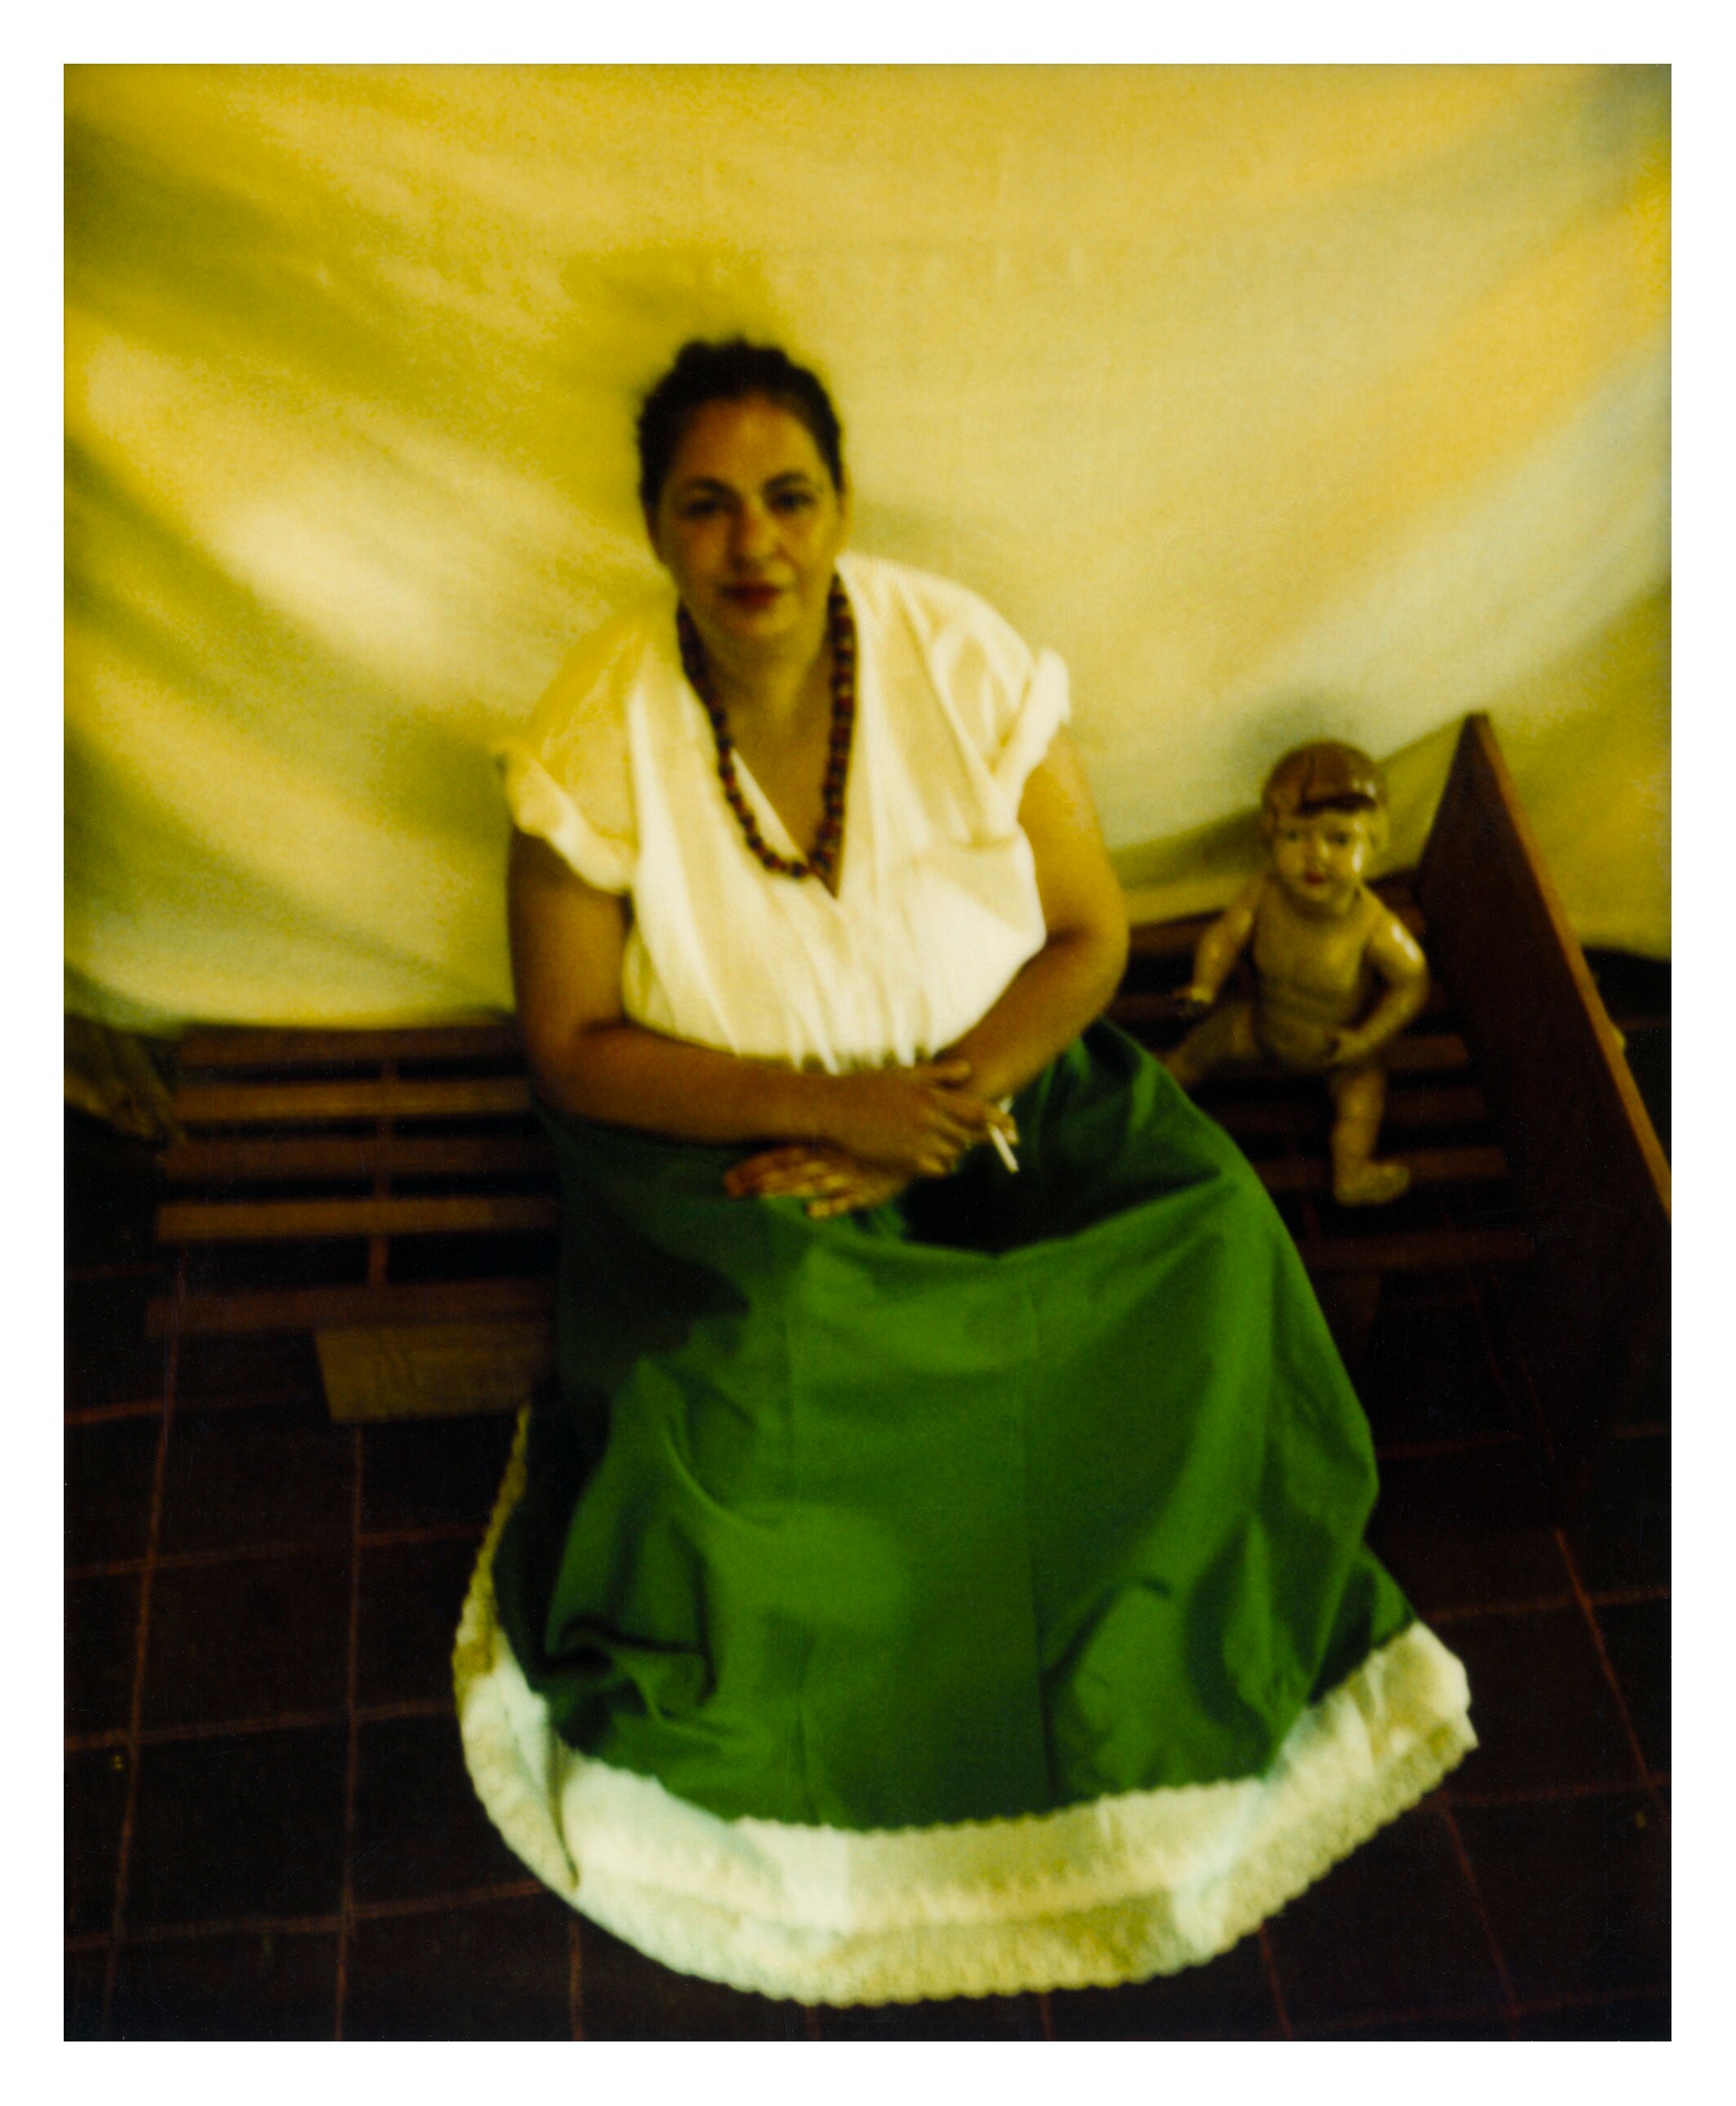 A 90s photograph of the artist Destiny Deacon as Frida Kahlo, a doll next to her